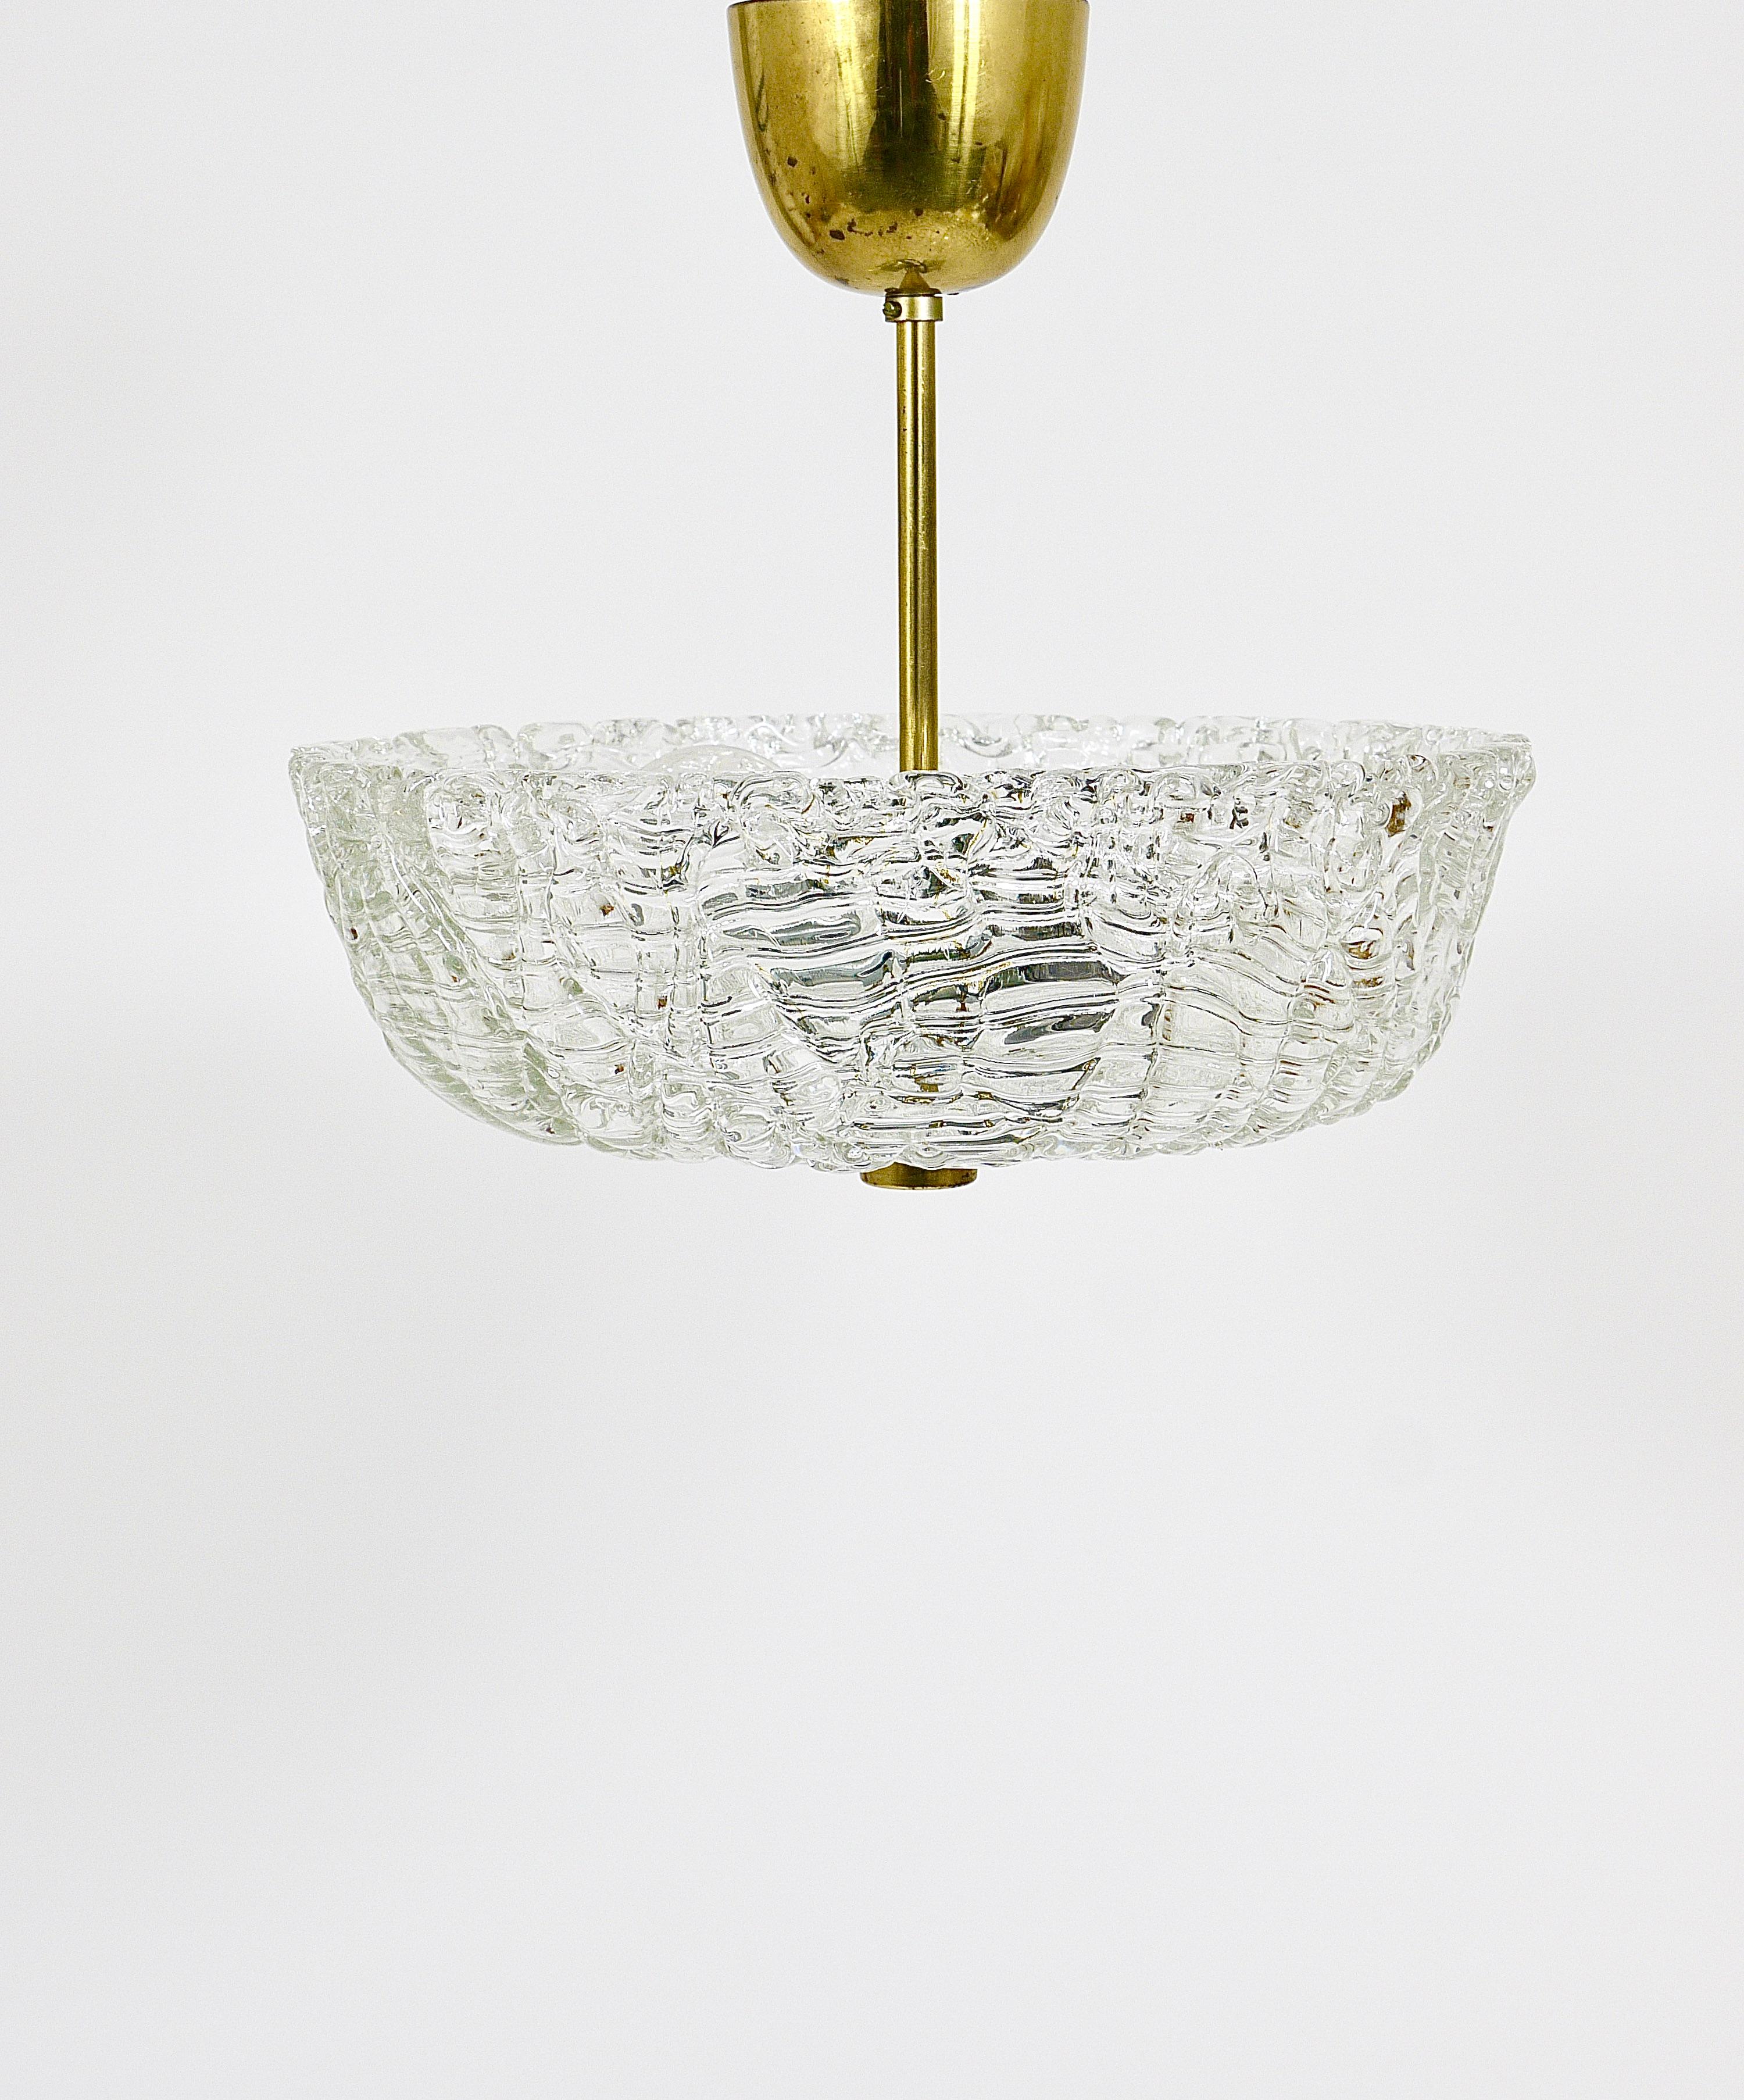 A beautiful petite round modernist brass and glass chandelier from the 1950s, manufactured by J.T. Kalmar in Vienna, Austria. This charming pendant light features a brass frame with a round lampshade made of clear, solid textured 